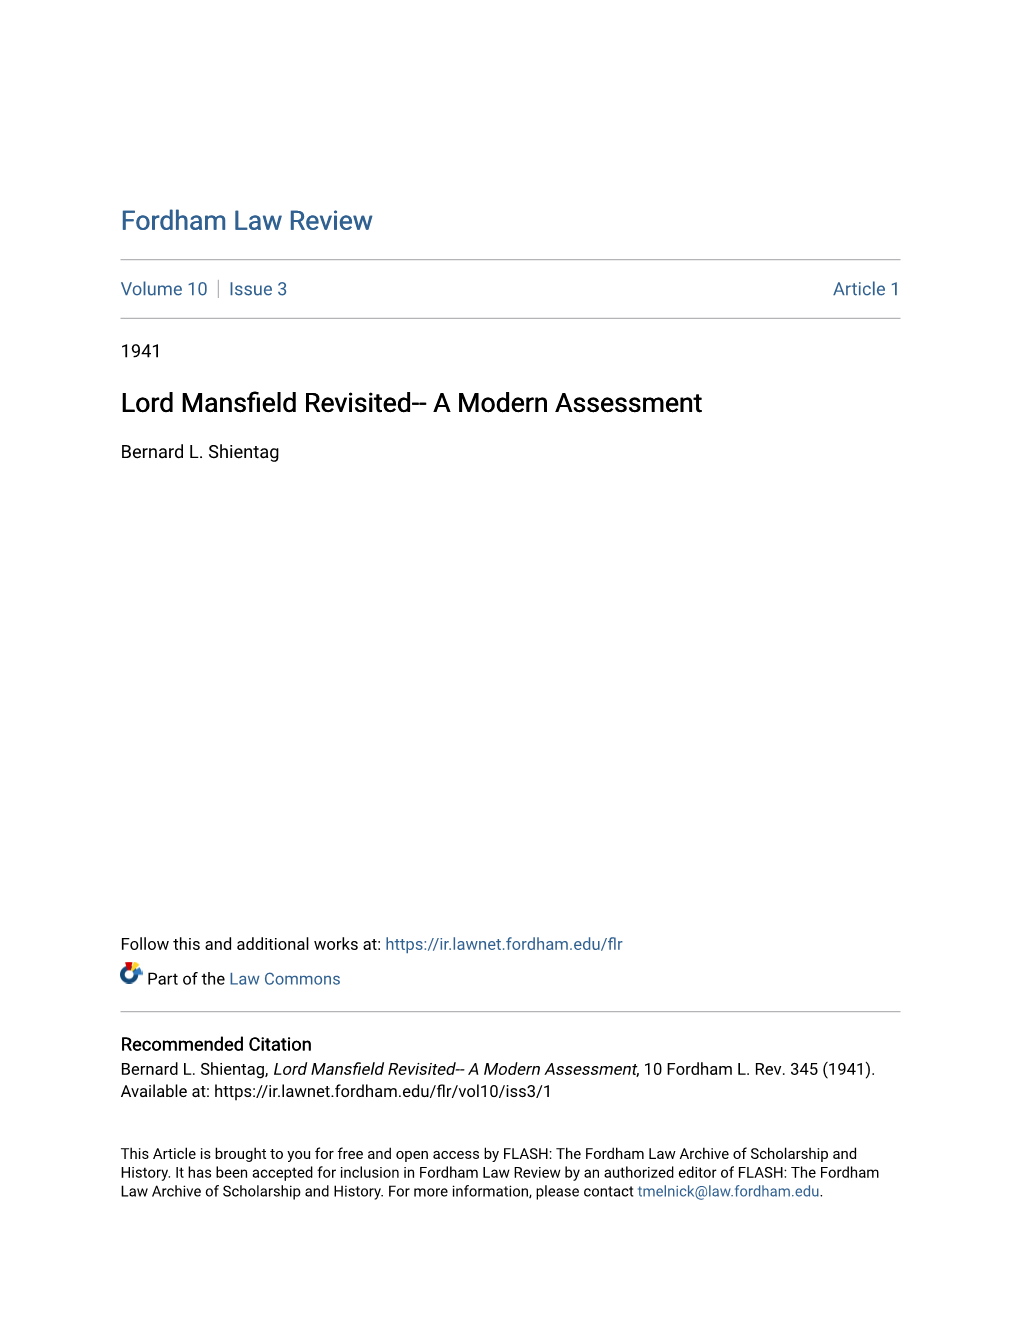 Lord Mansfield Revisited-- a Modern Assessment